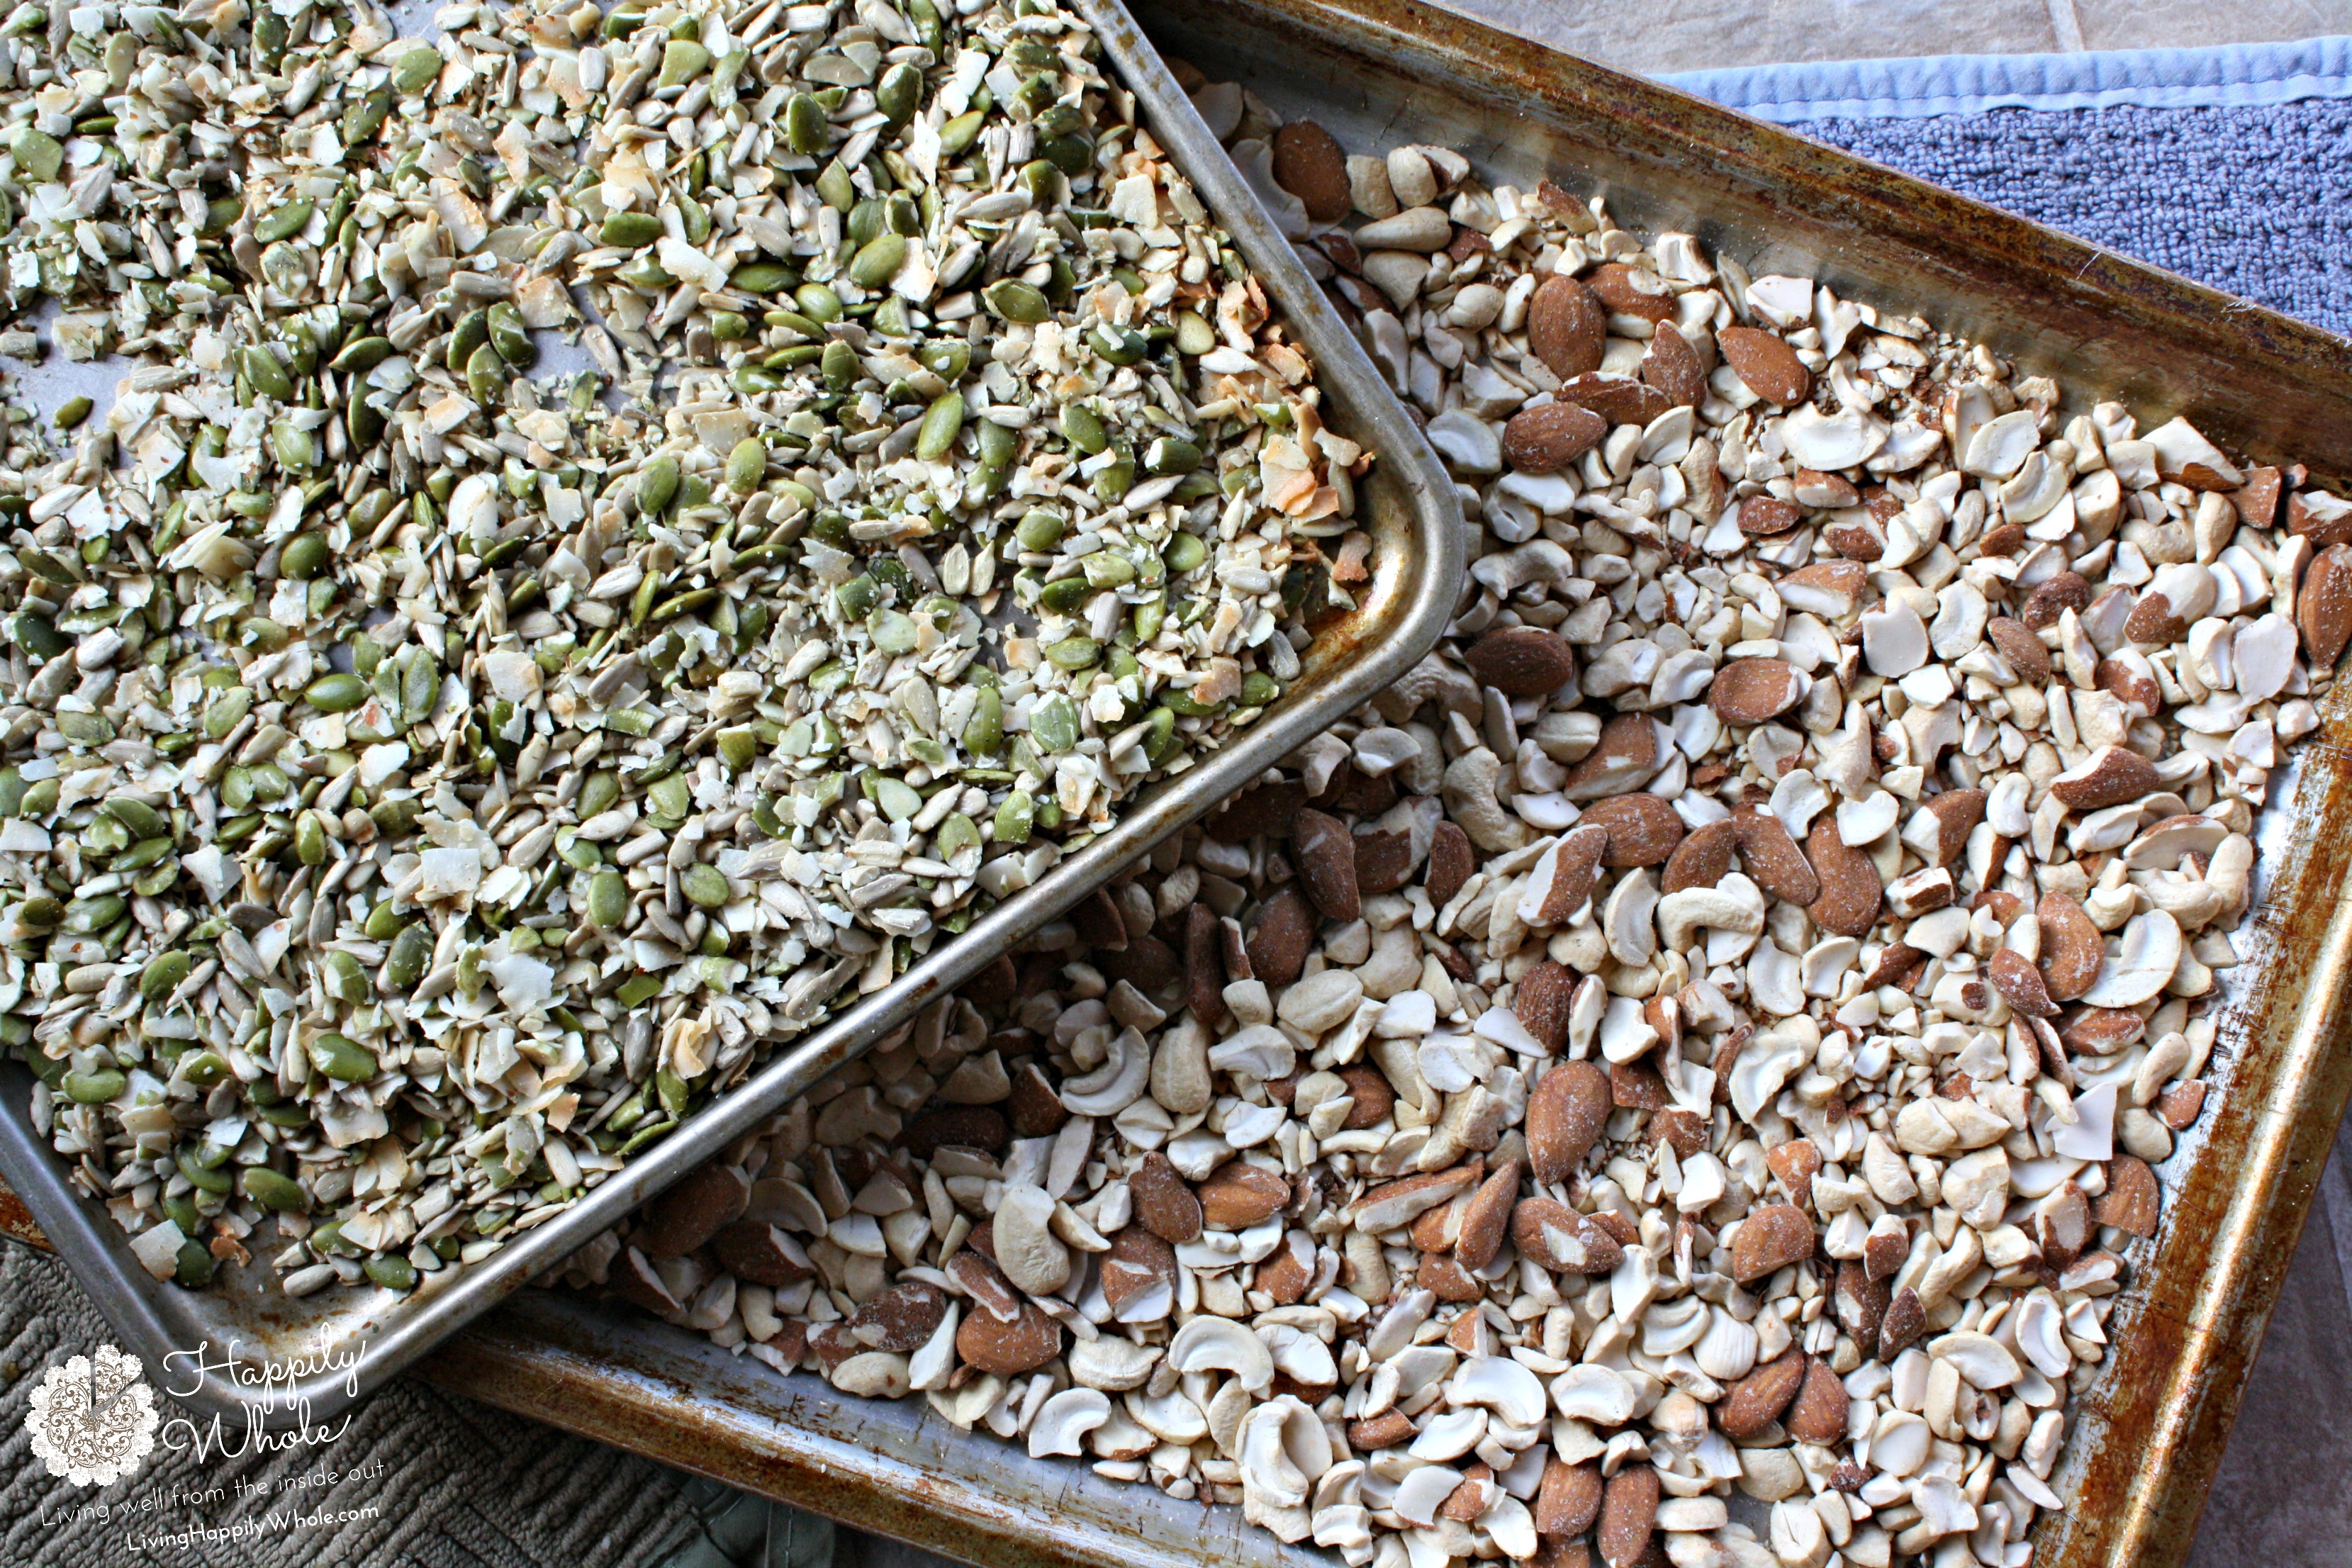 Seeds and Nuts after they've been toasted and coarsely chopped